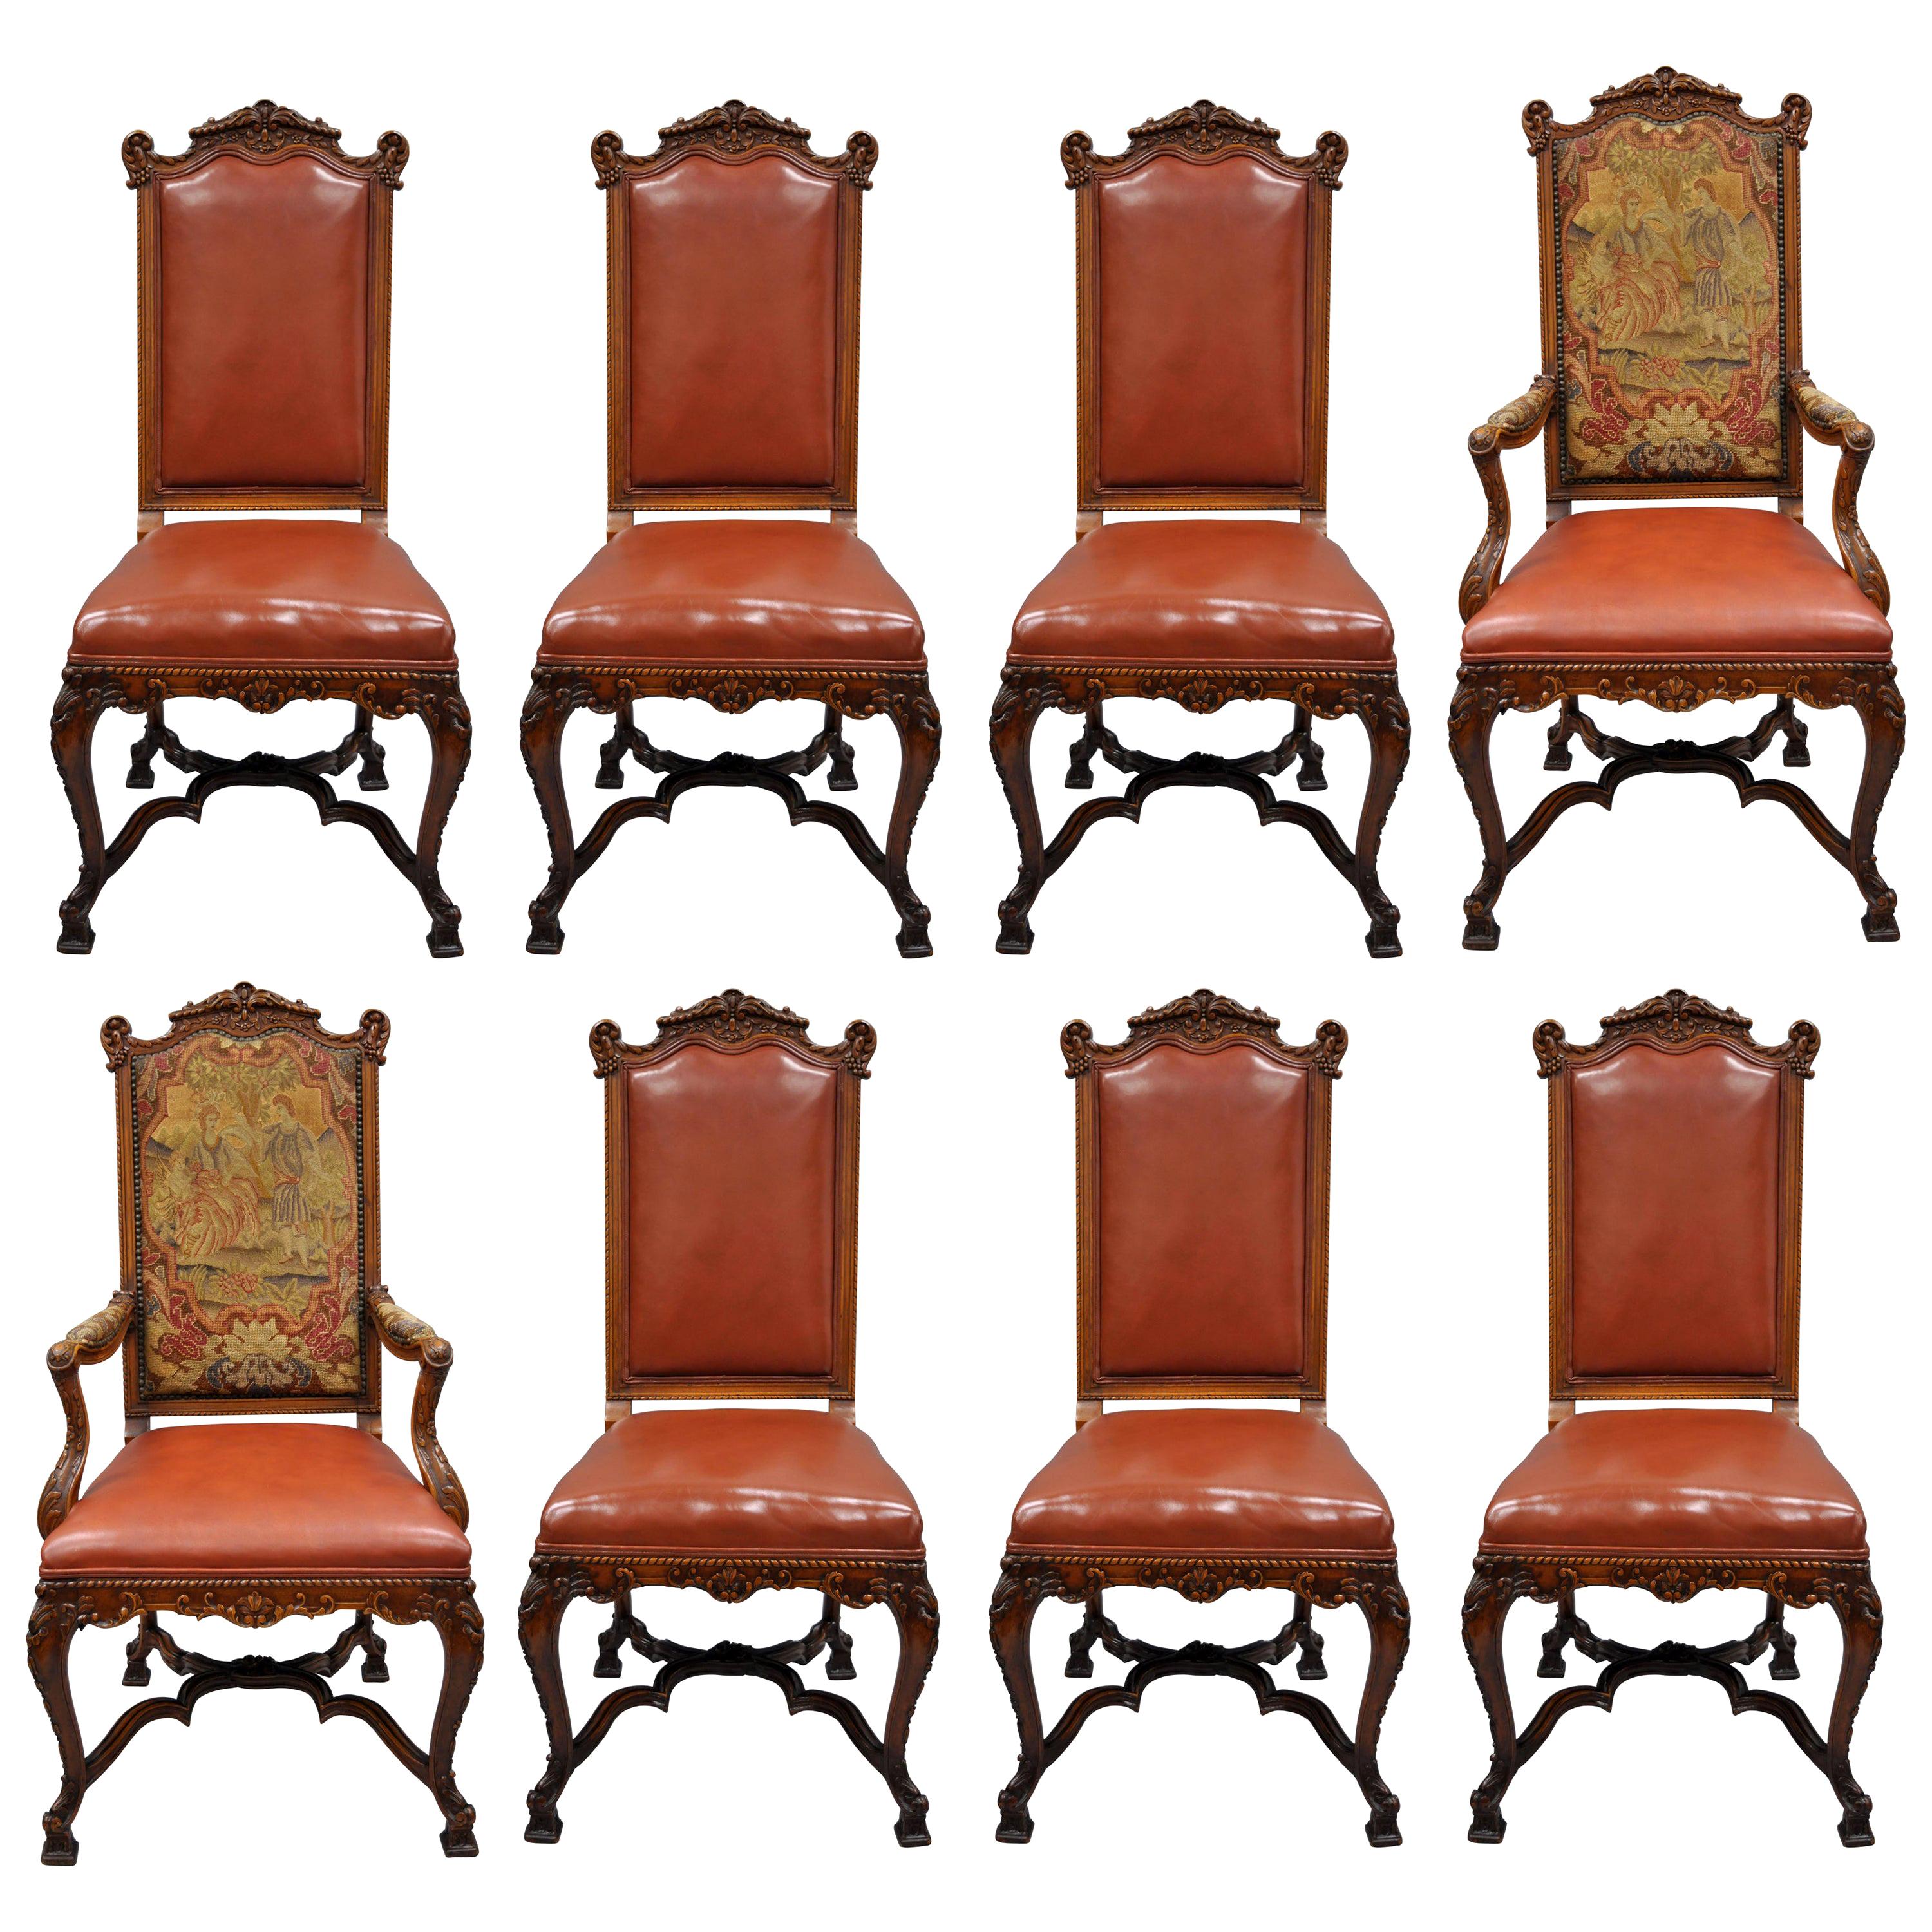 Eight Italian Renaissance Rococo Carved Walnut Needlepoint Leather Dining Chairs